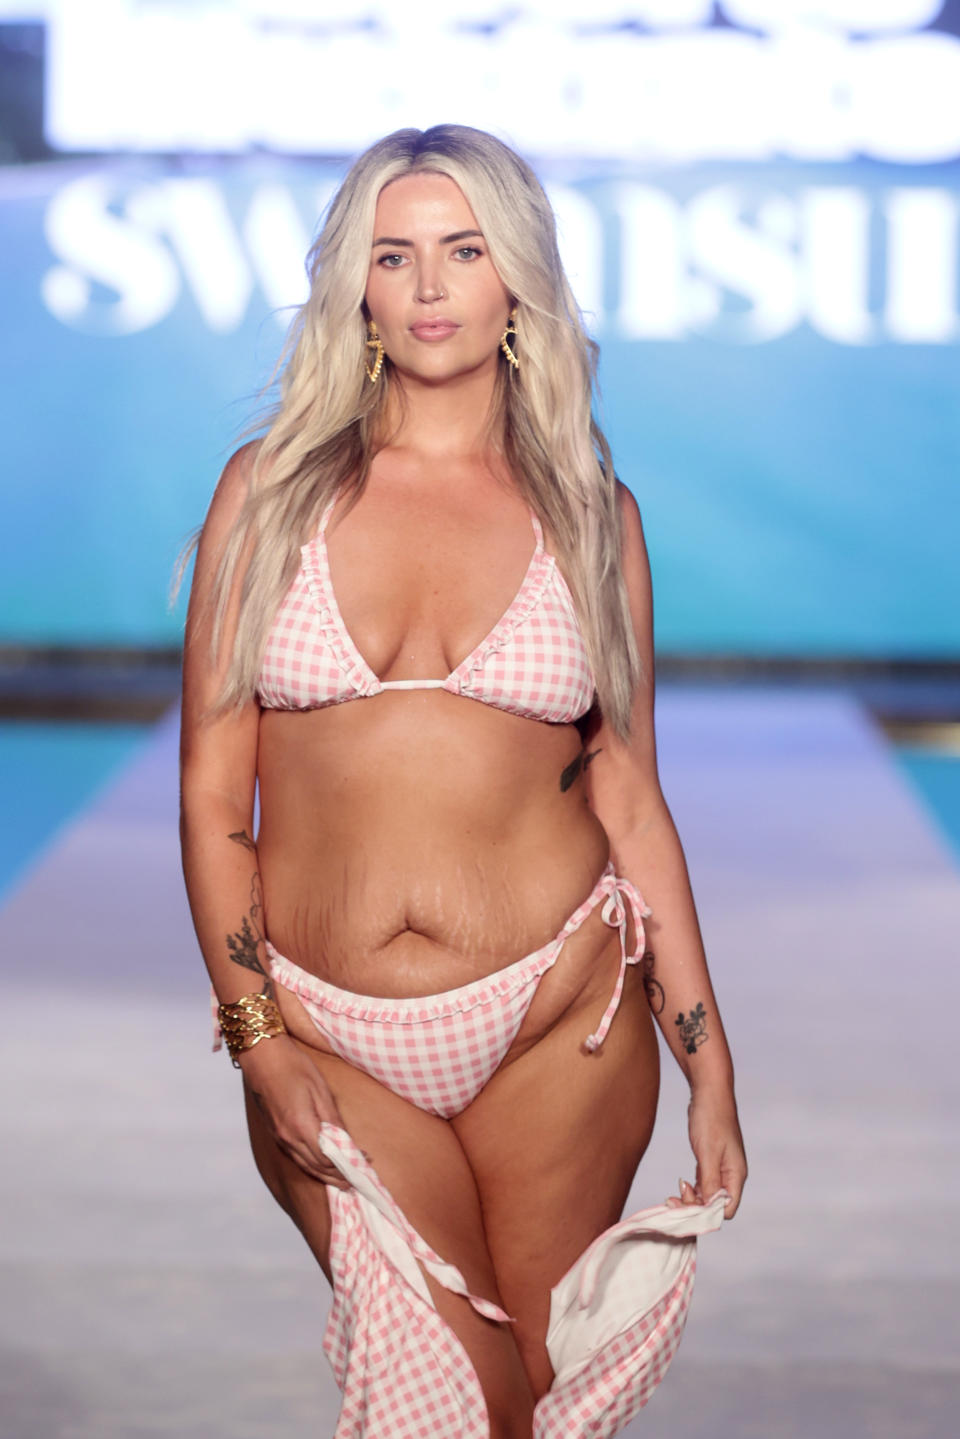 Landry wore two looks from her collaboration with Knix Swimwear for the runway. (Photo by John Parra/Getty Images for Sports Illustrated)